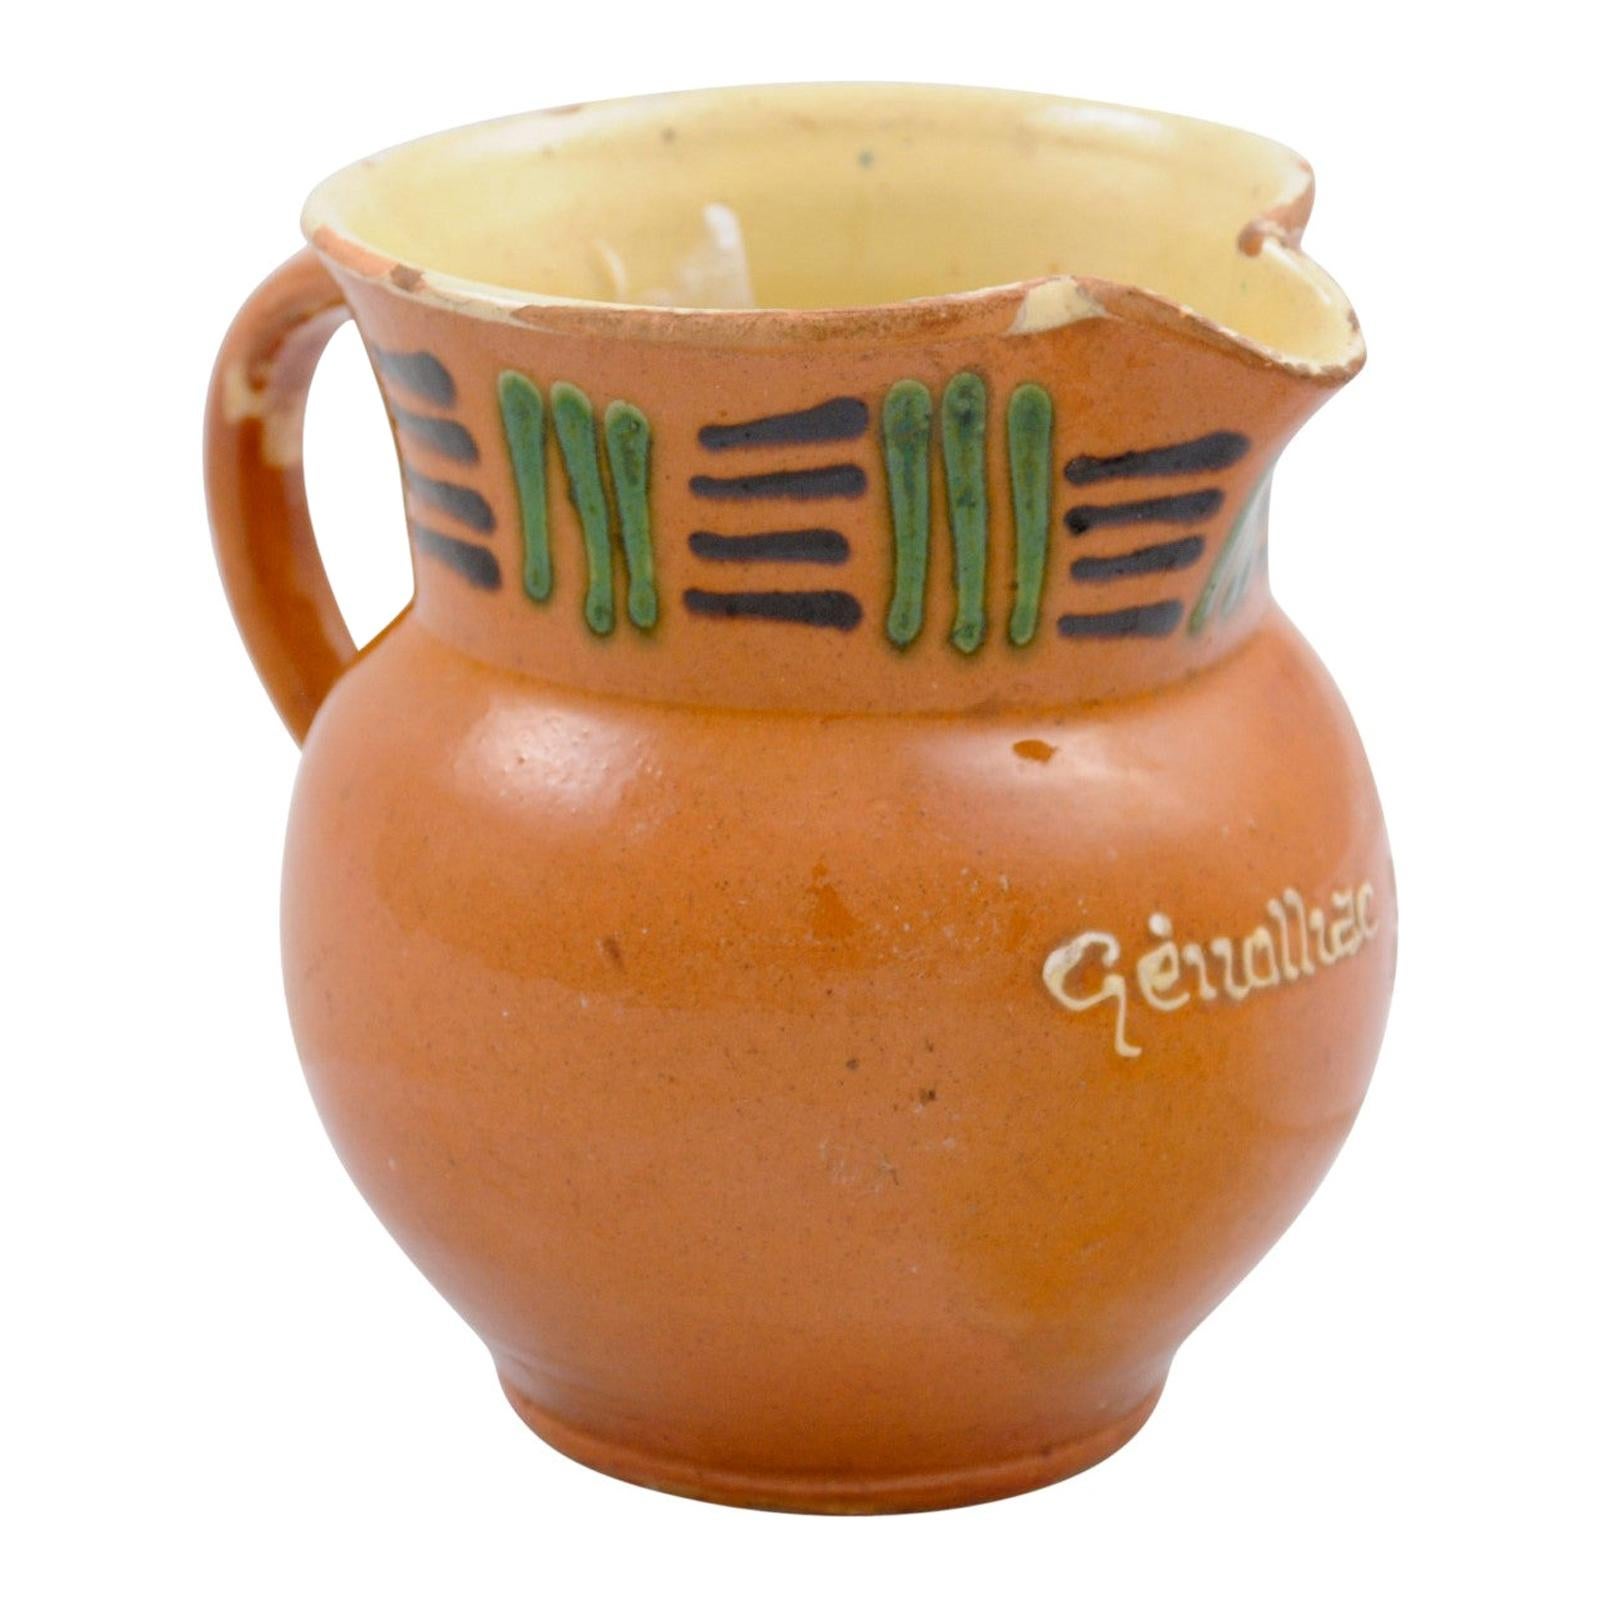 French 19th Century Terracotta Pitcher from Génolhac with Russet Colored Glaze